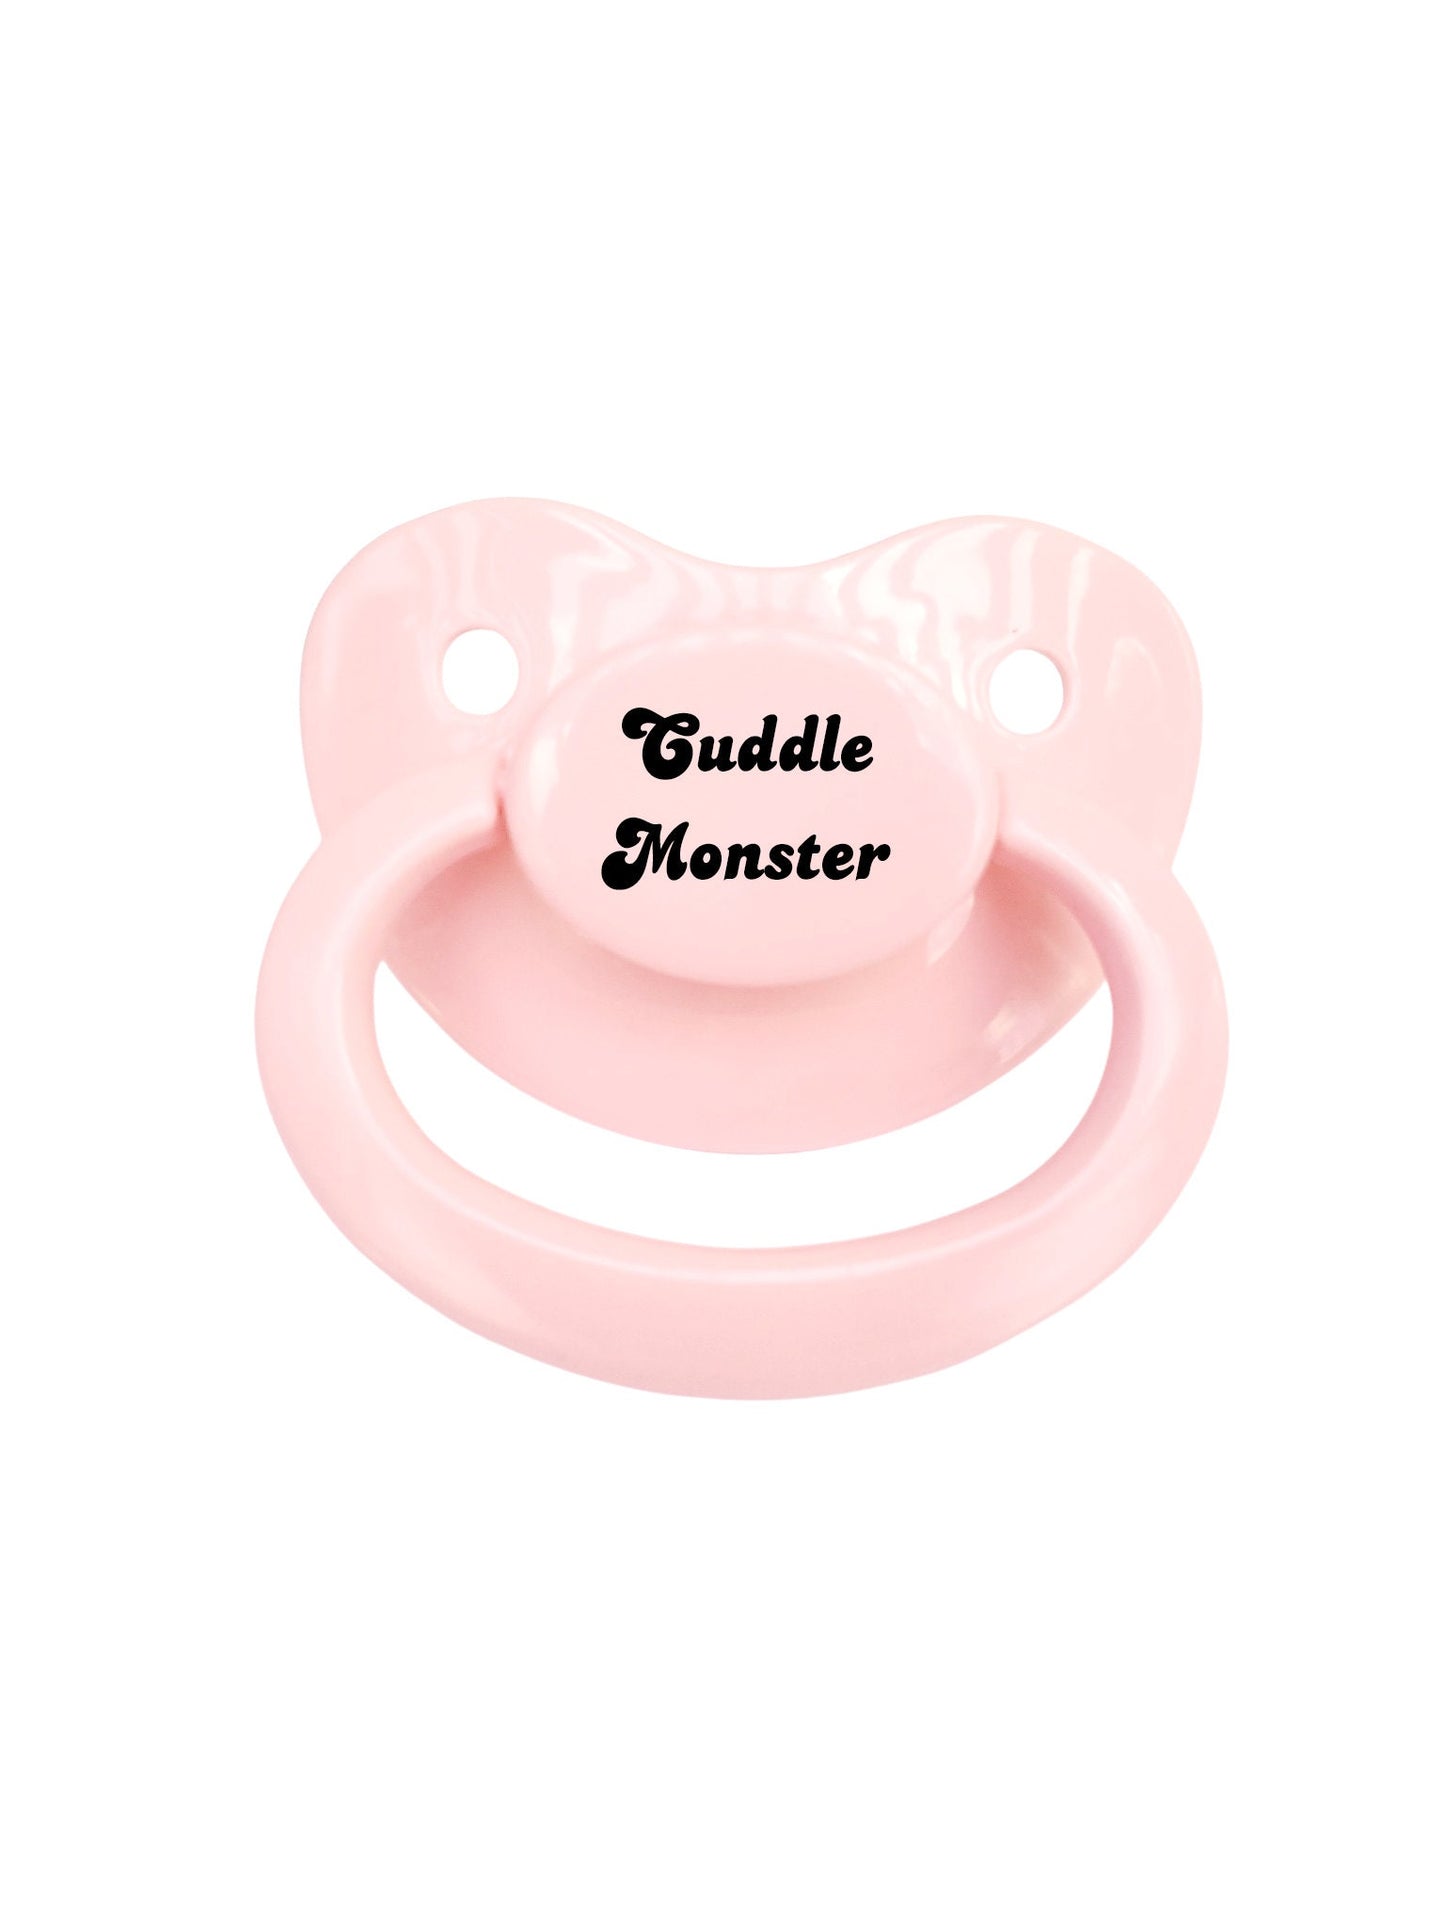 Cuddle Monster Adult Pacifier